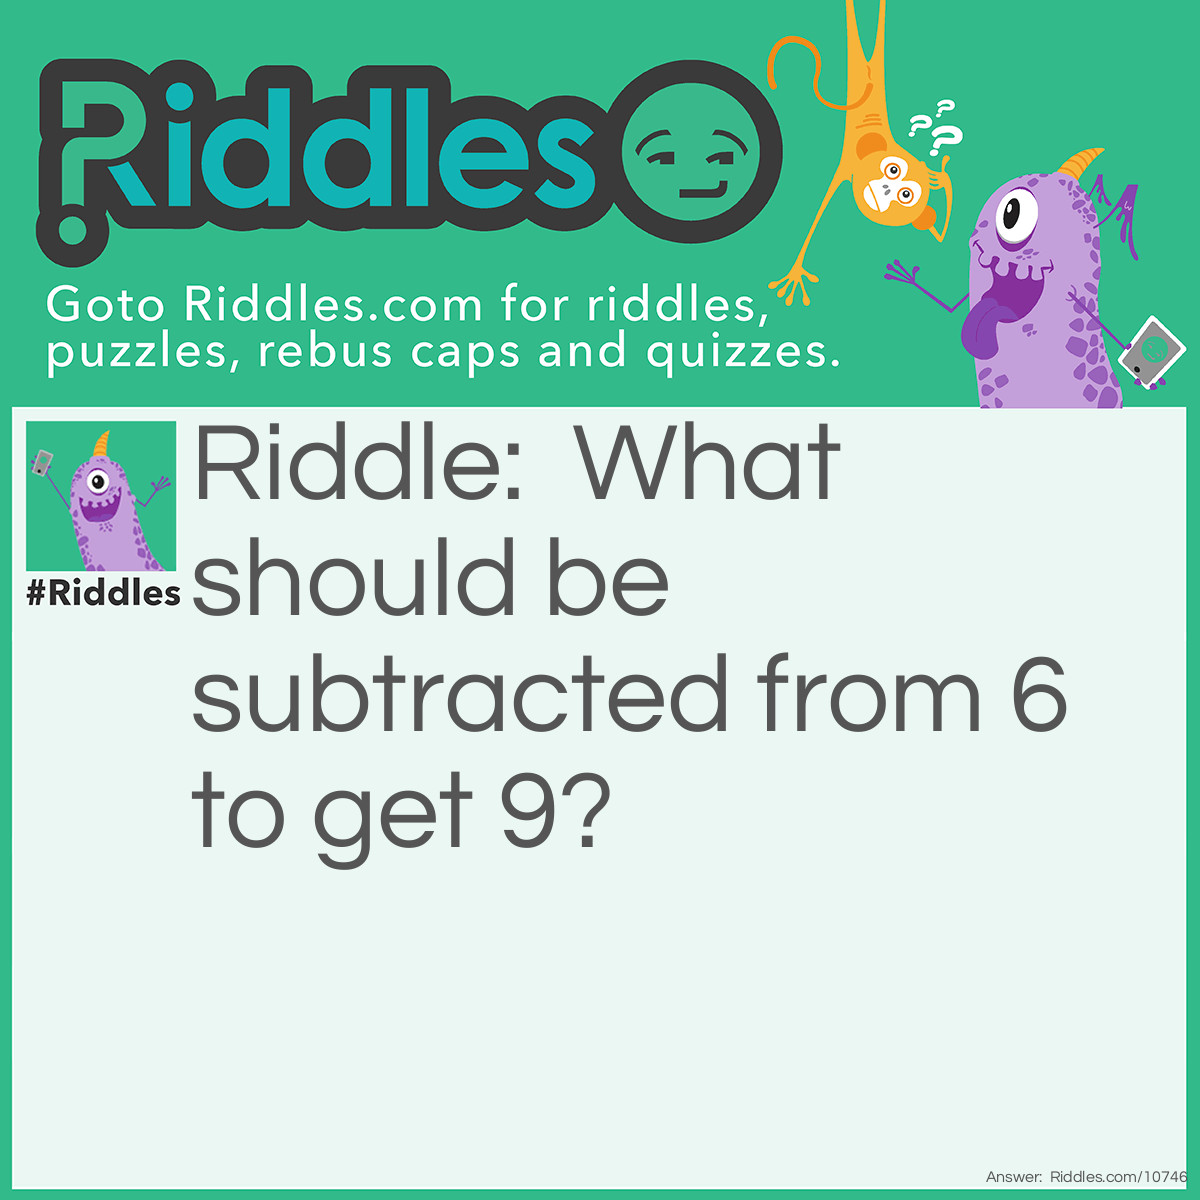 Riddle: What should be subtracted from 6 to get 9? Answer: Remove S from SIX to get IX.